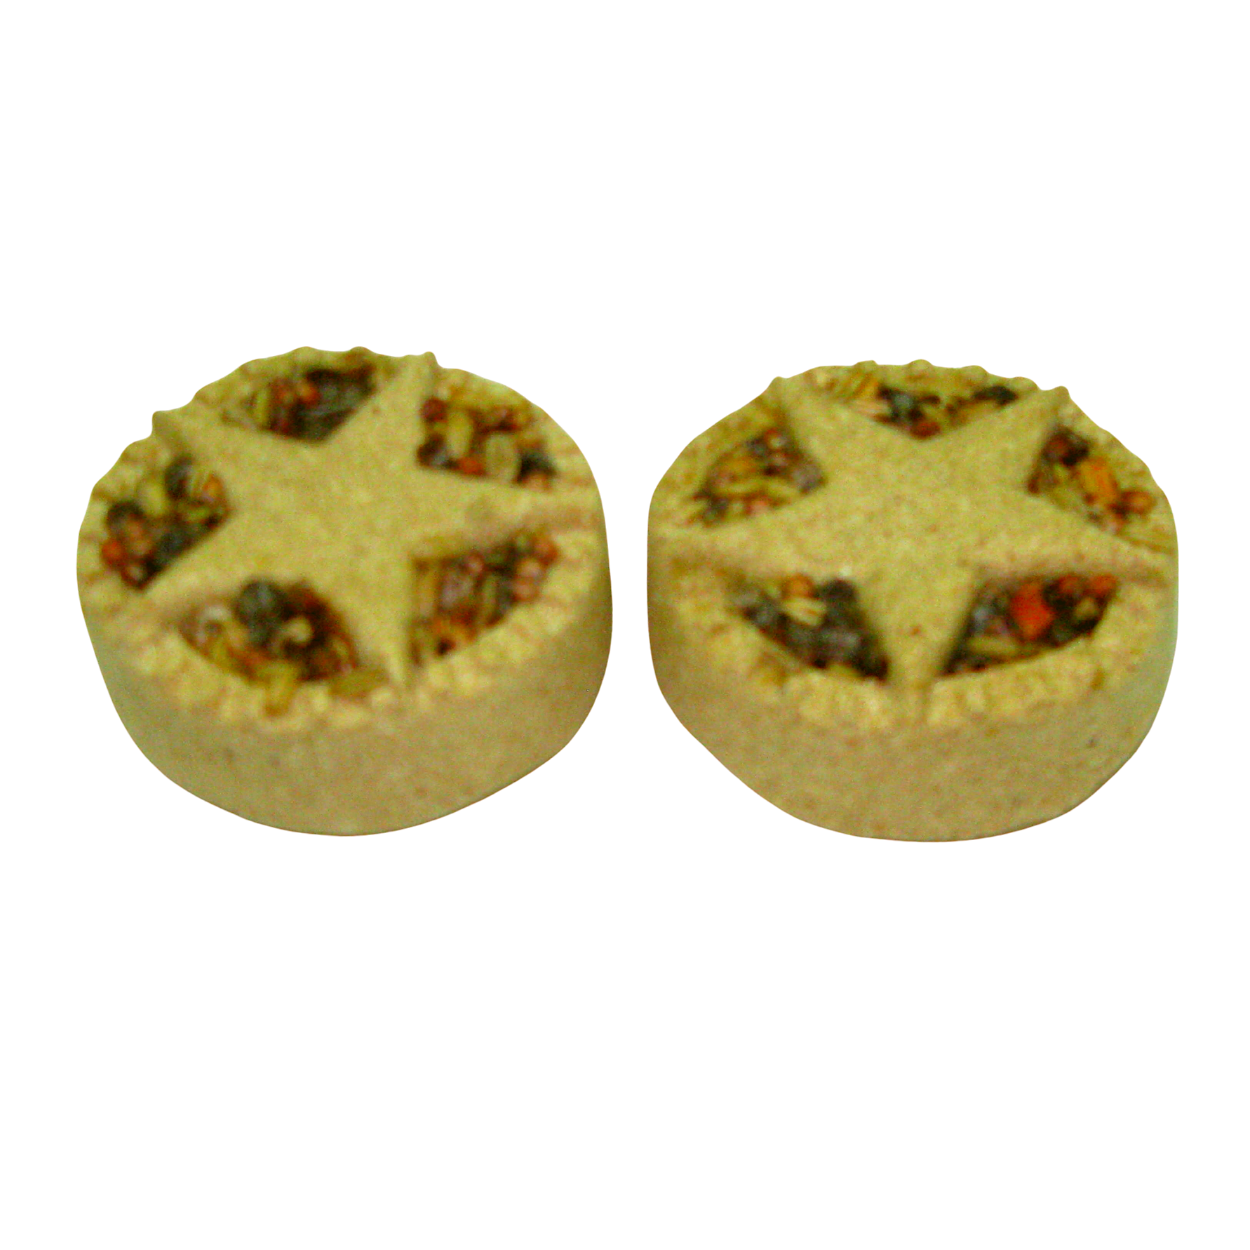 Cupid & Comet Treat & Gnaw Mince Pies 2 Pack